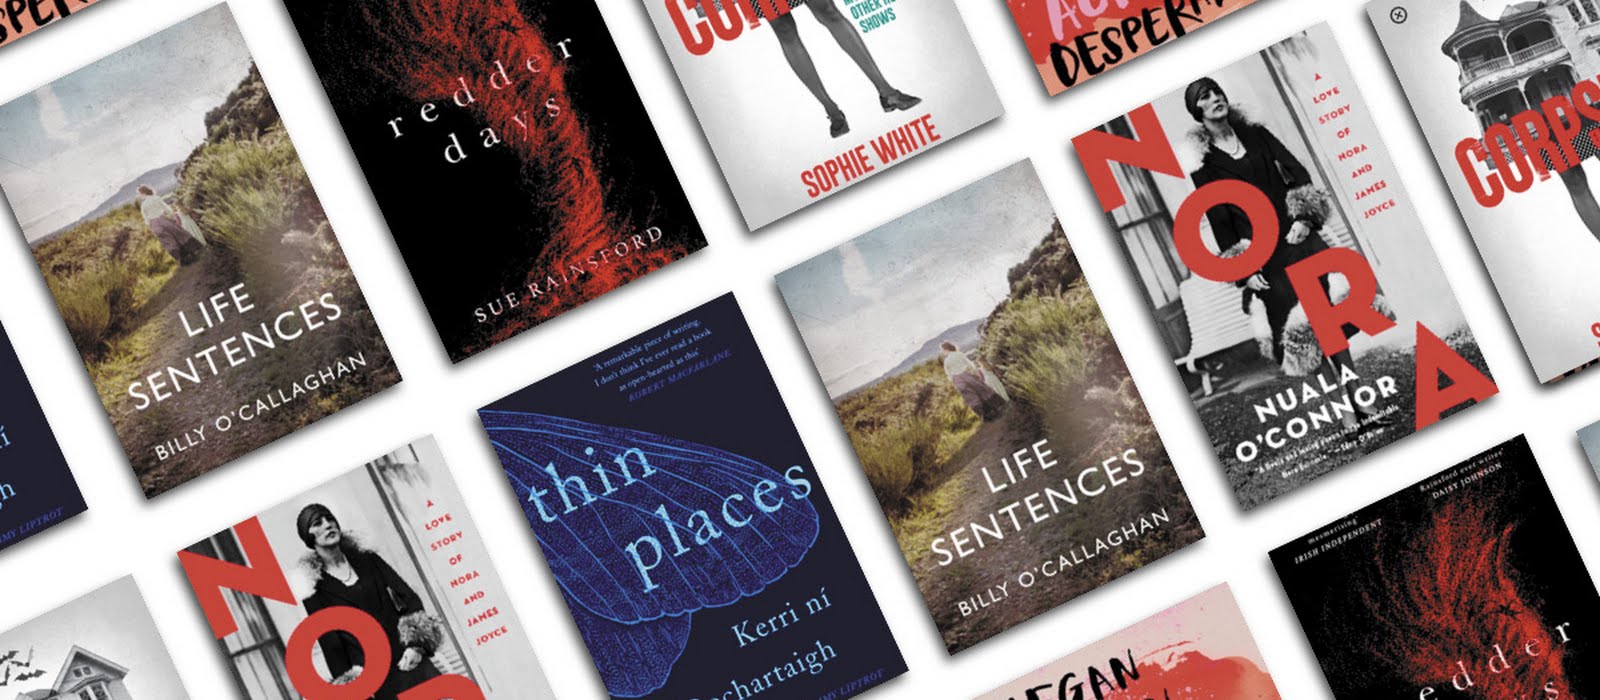 6 brilliant new books to put on your reading lists